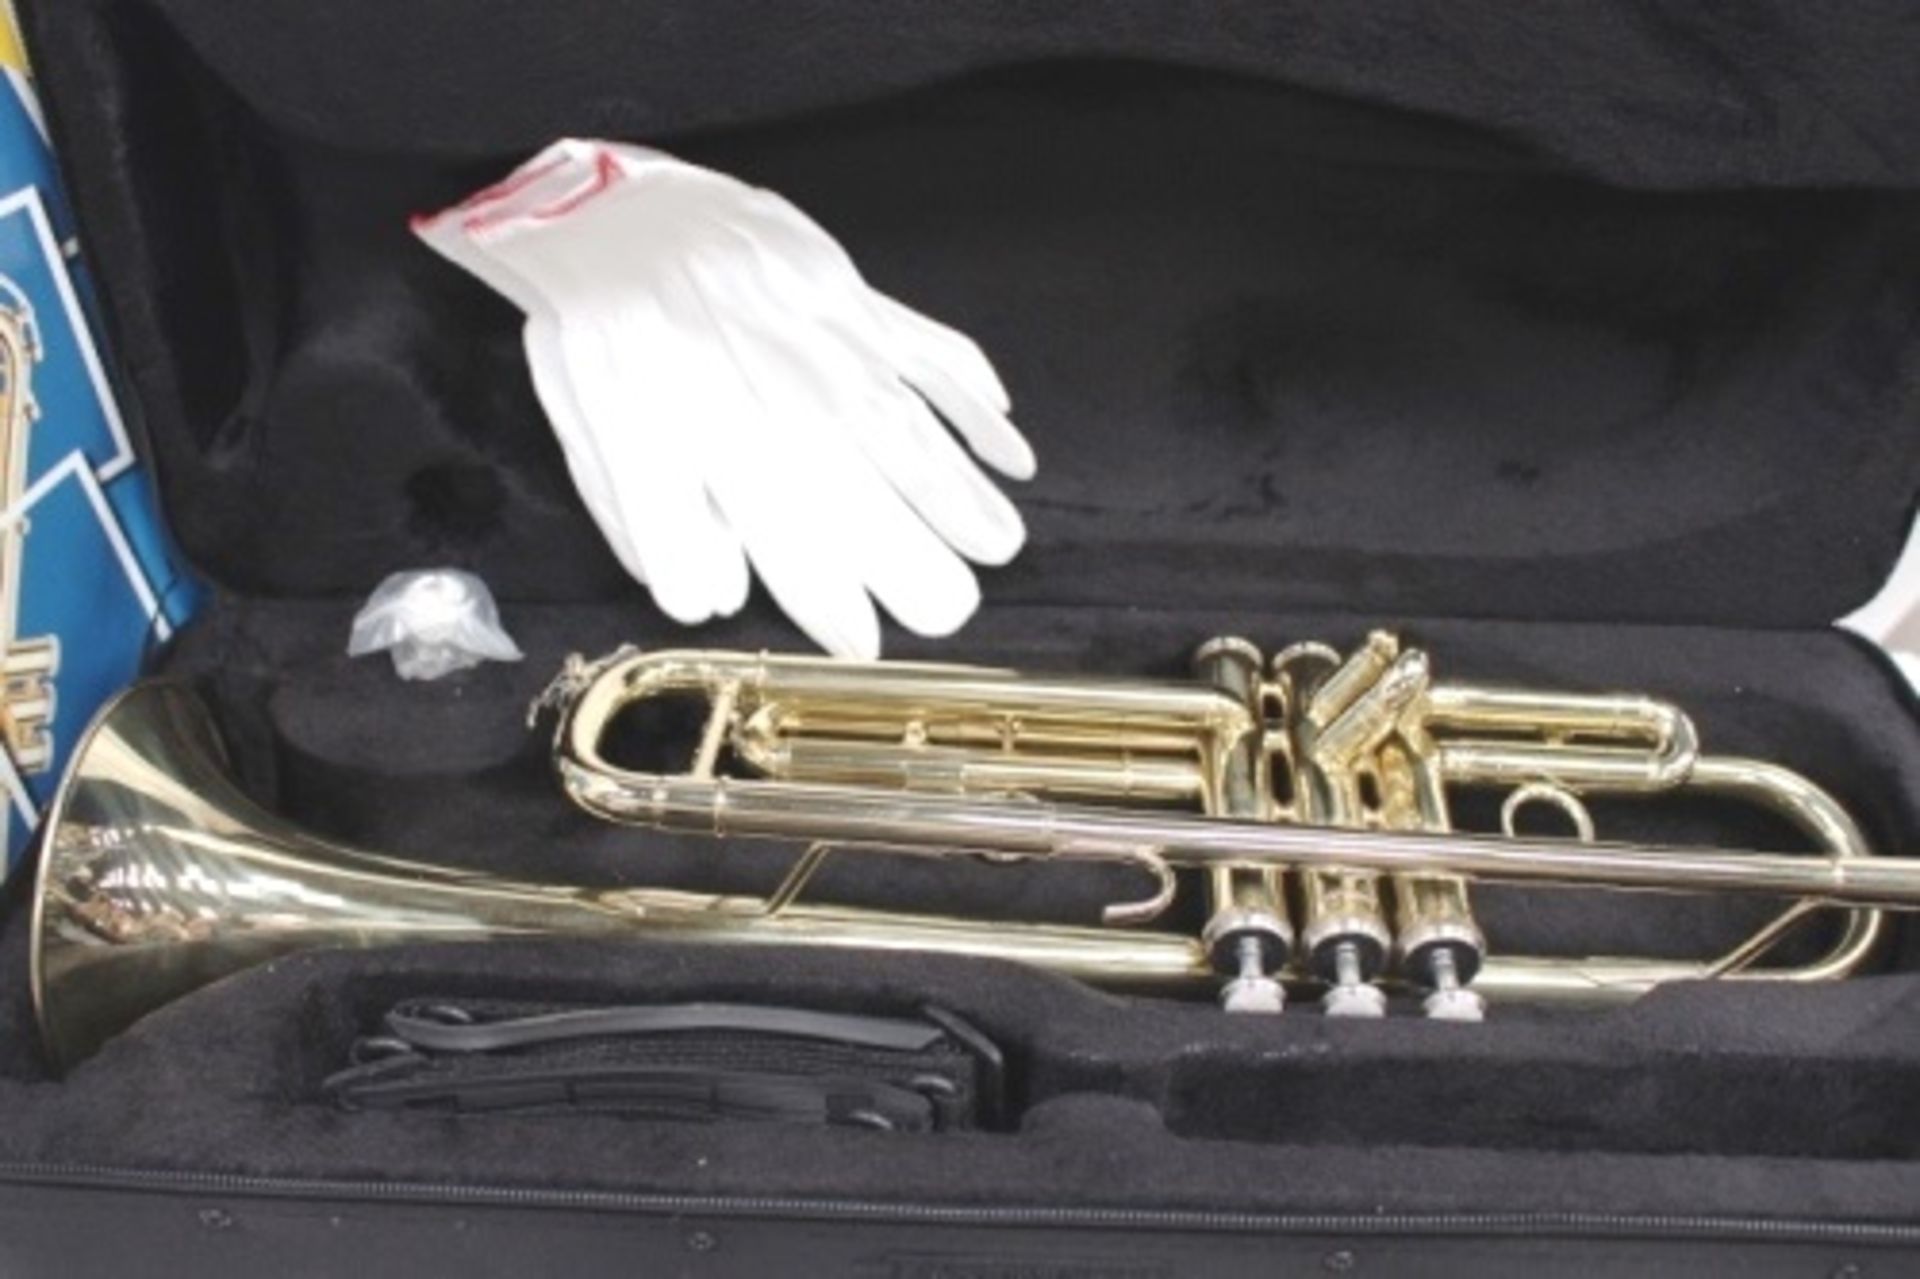 1 x Gear4Music student trumpet, comes with hard case, music stand and John Miller's Trumpet Basics - Image 3 of 3